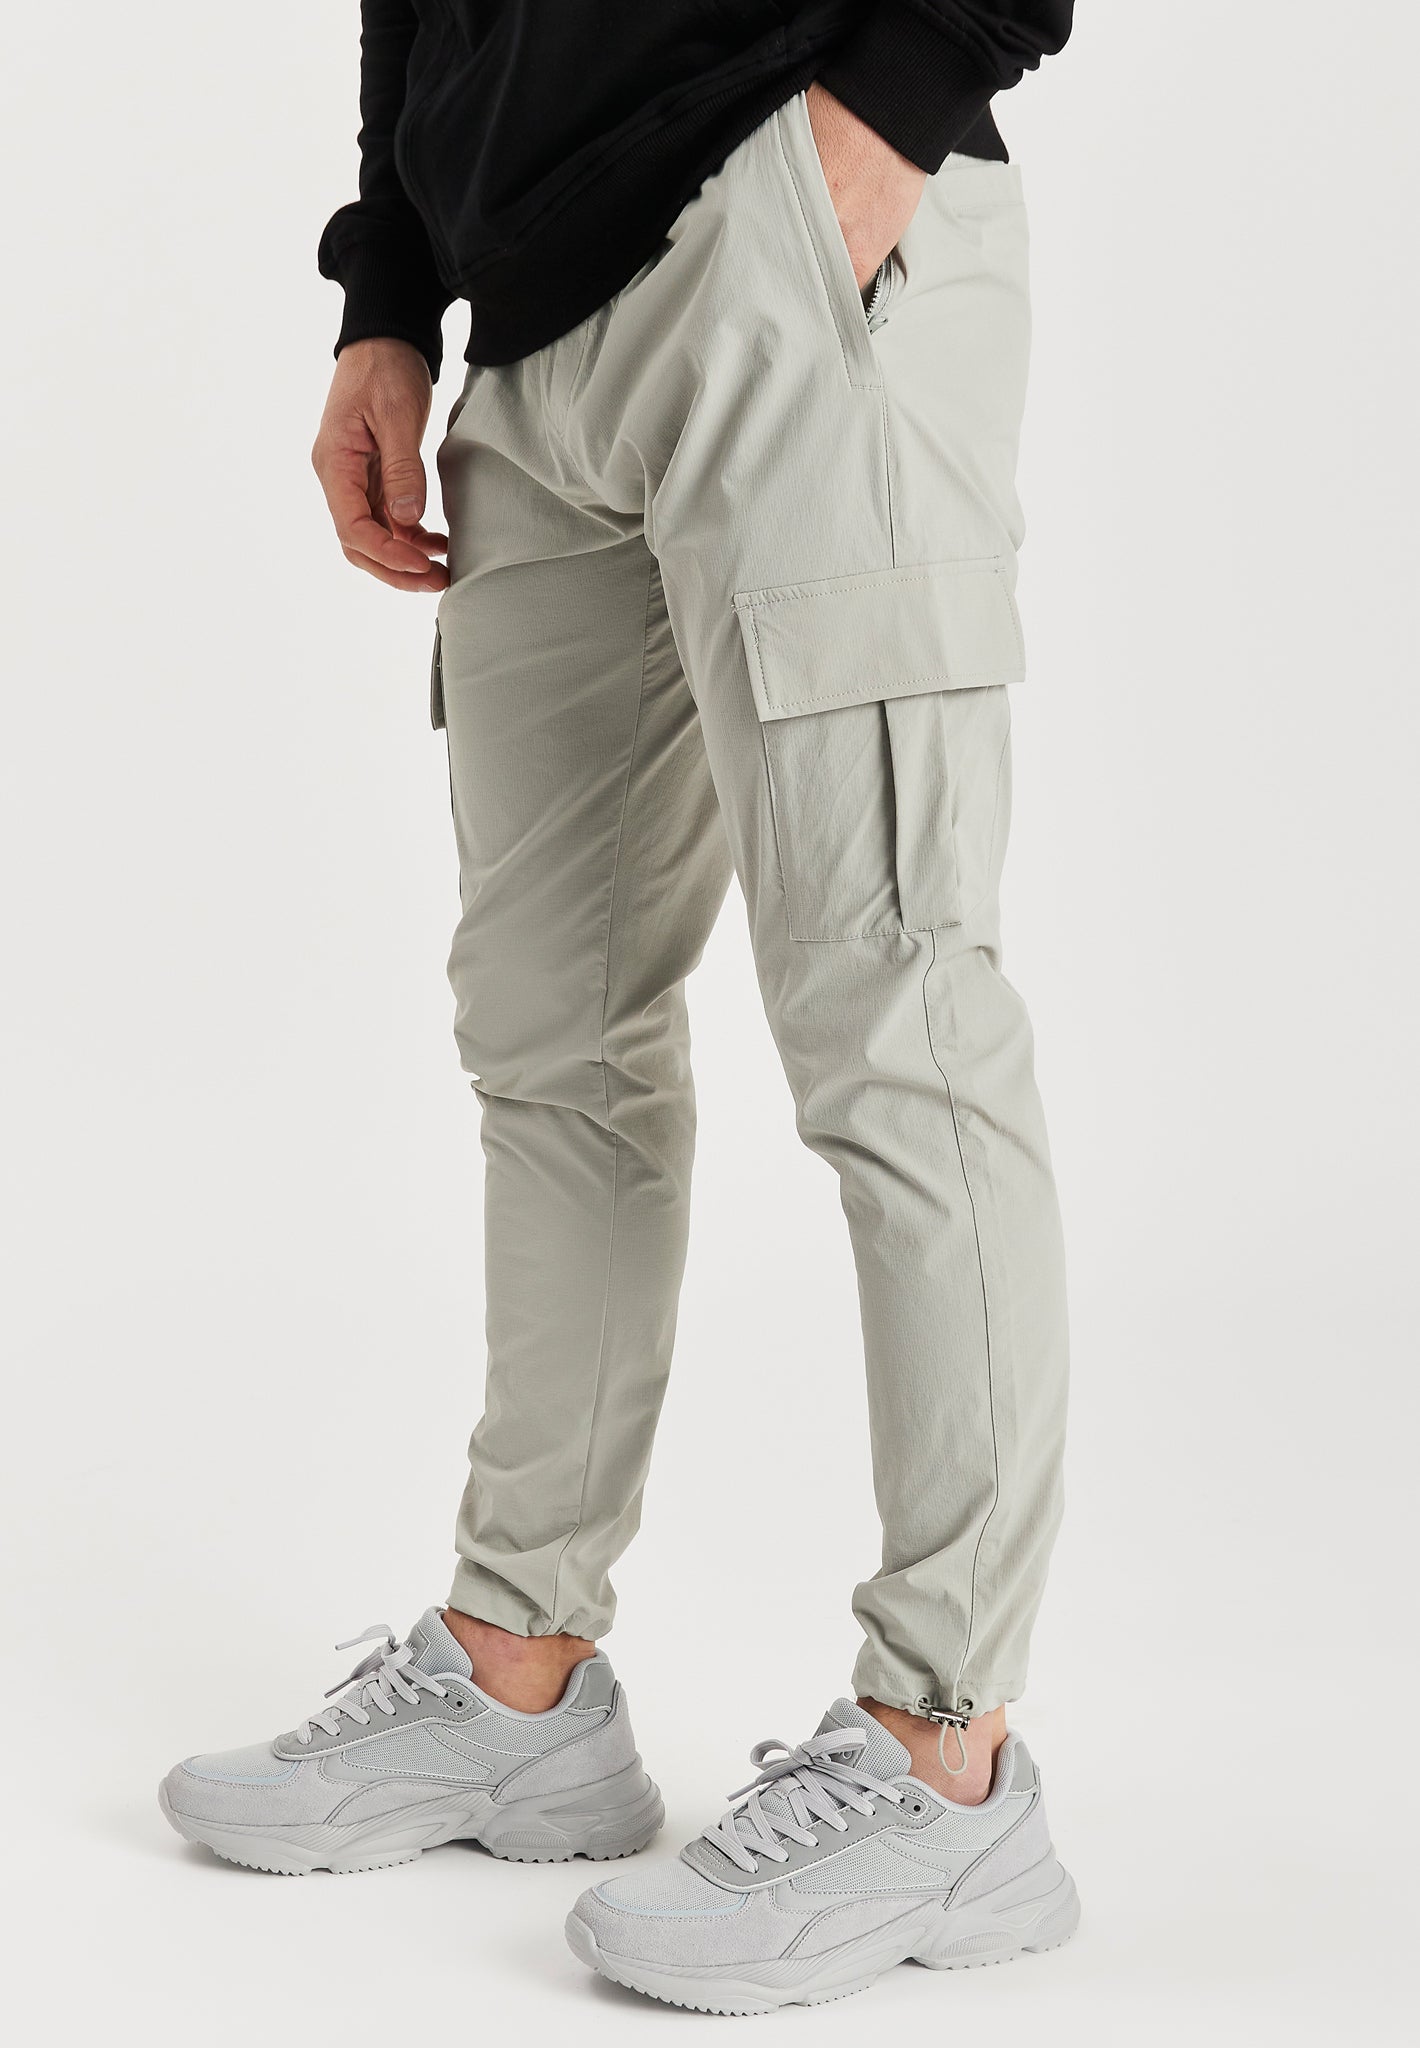 Navy Cargo Pants  Luciano Fashion Limited